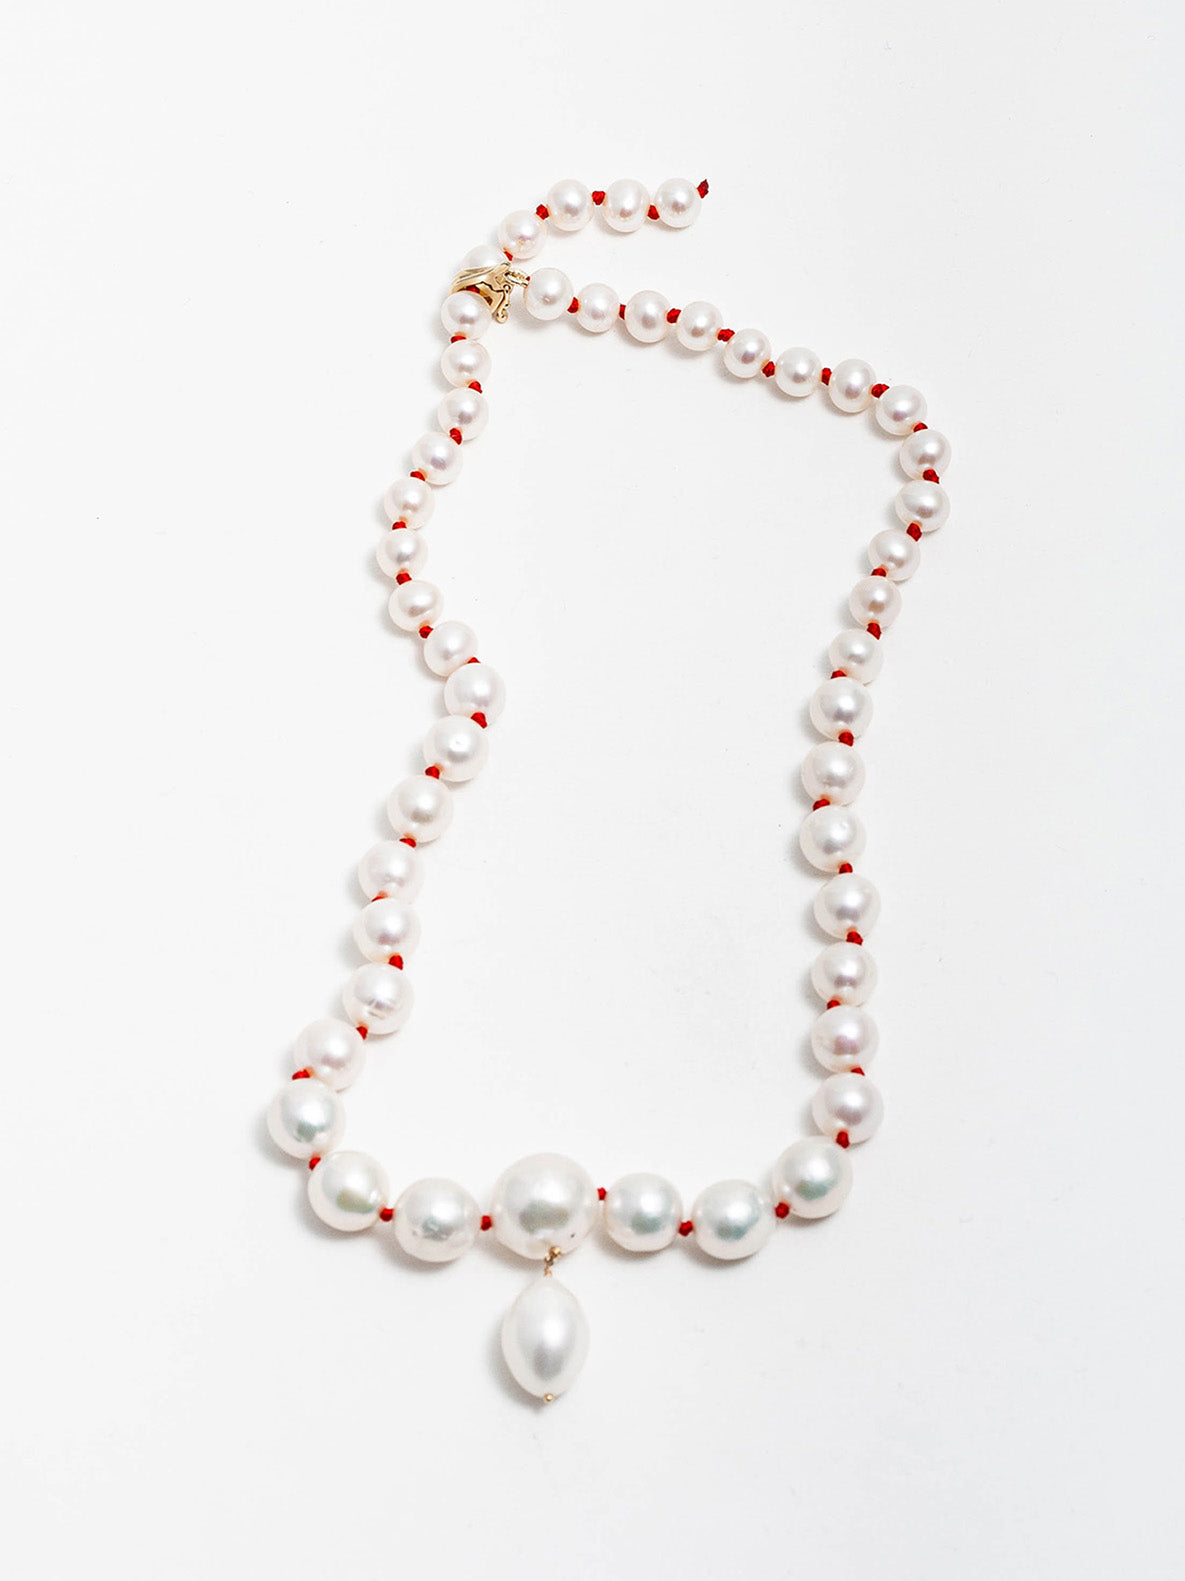 14kt Yellow Gold Boujee Pearl Necklace with Hand Knotted Red Thread pictured on light grey background.